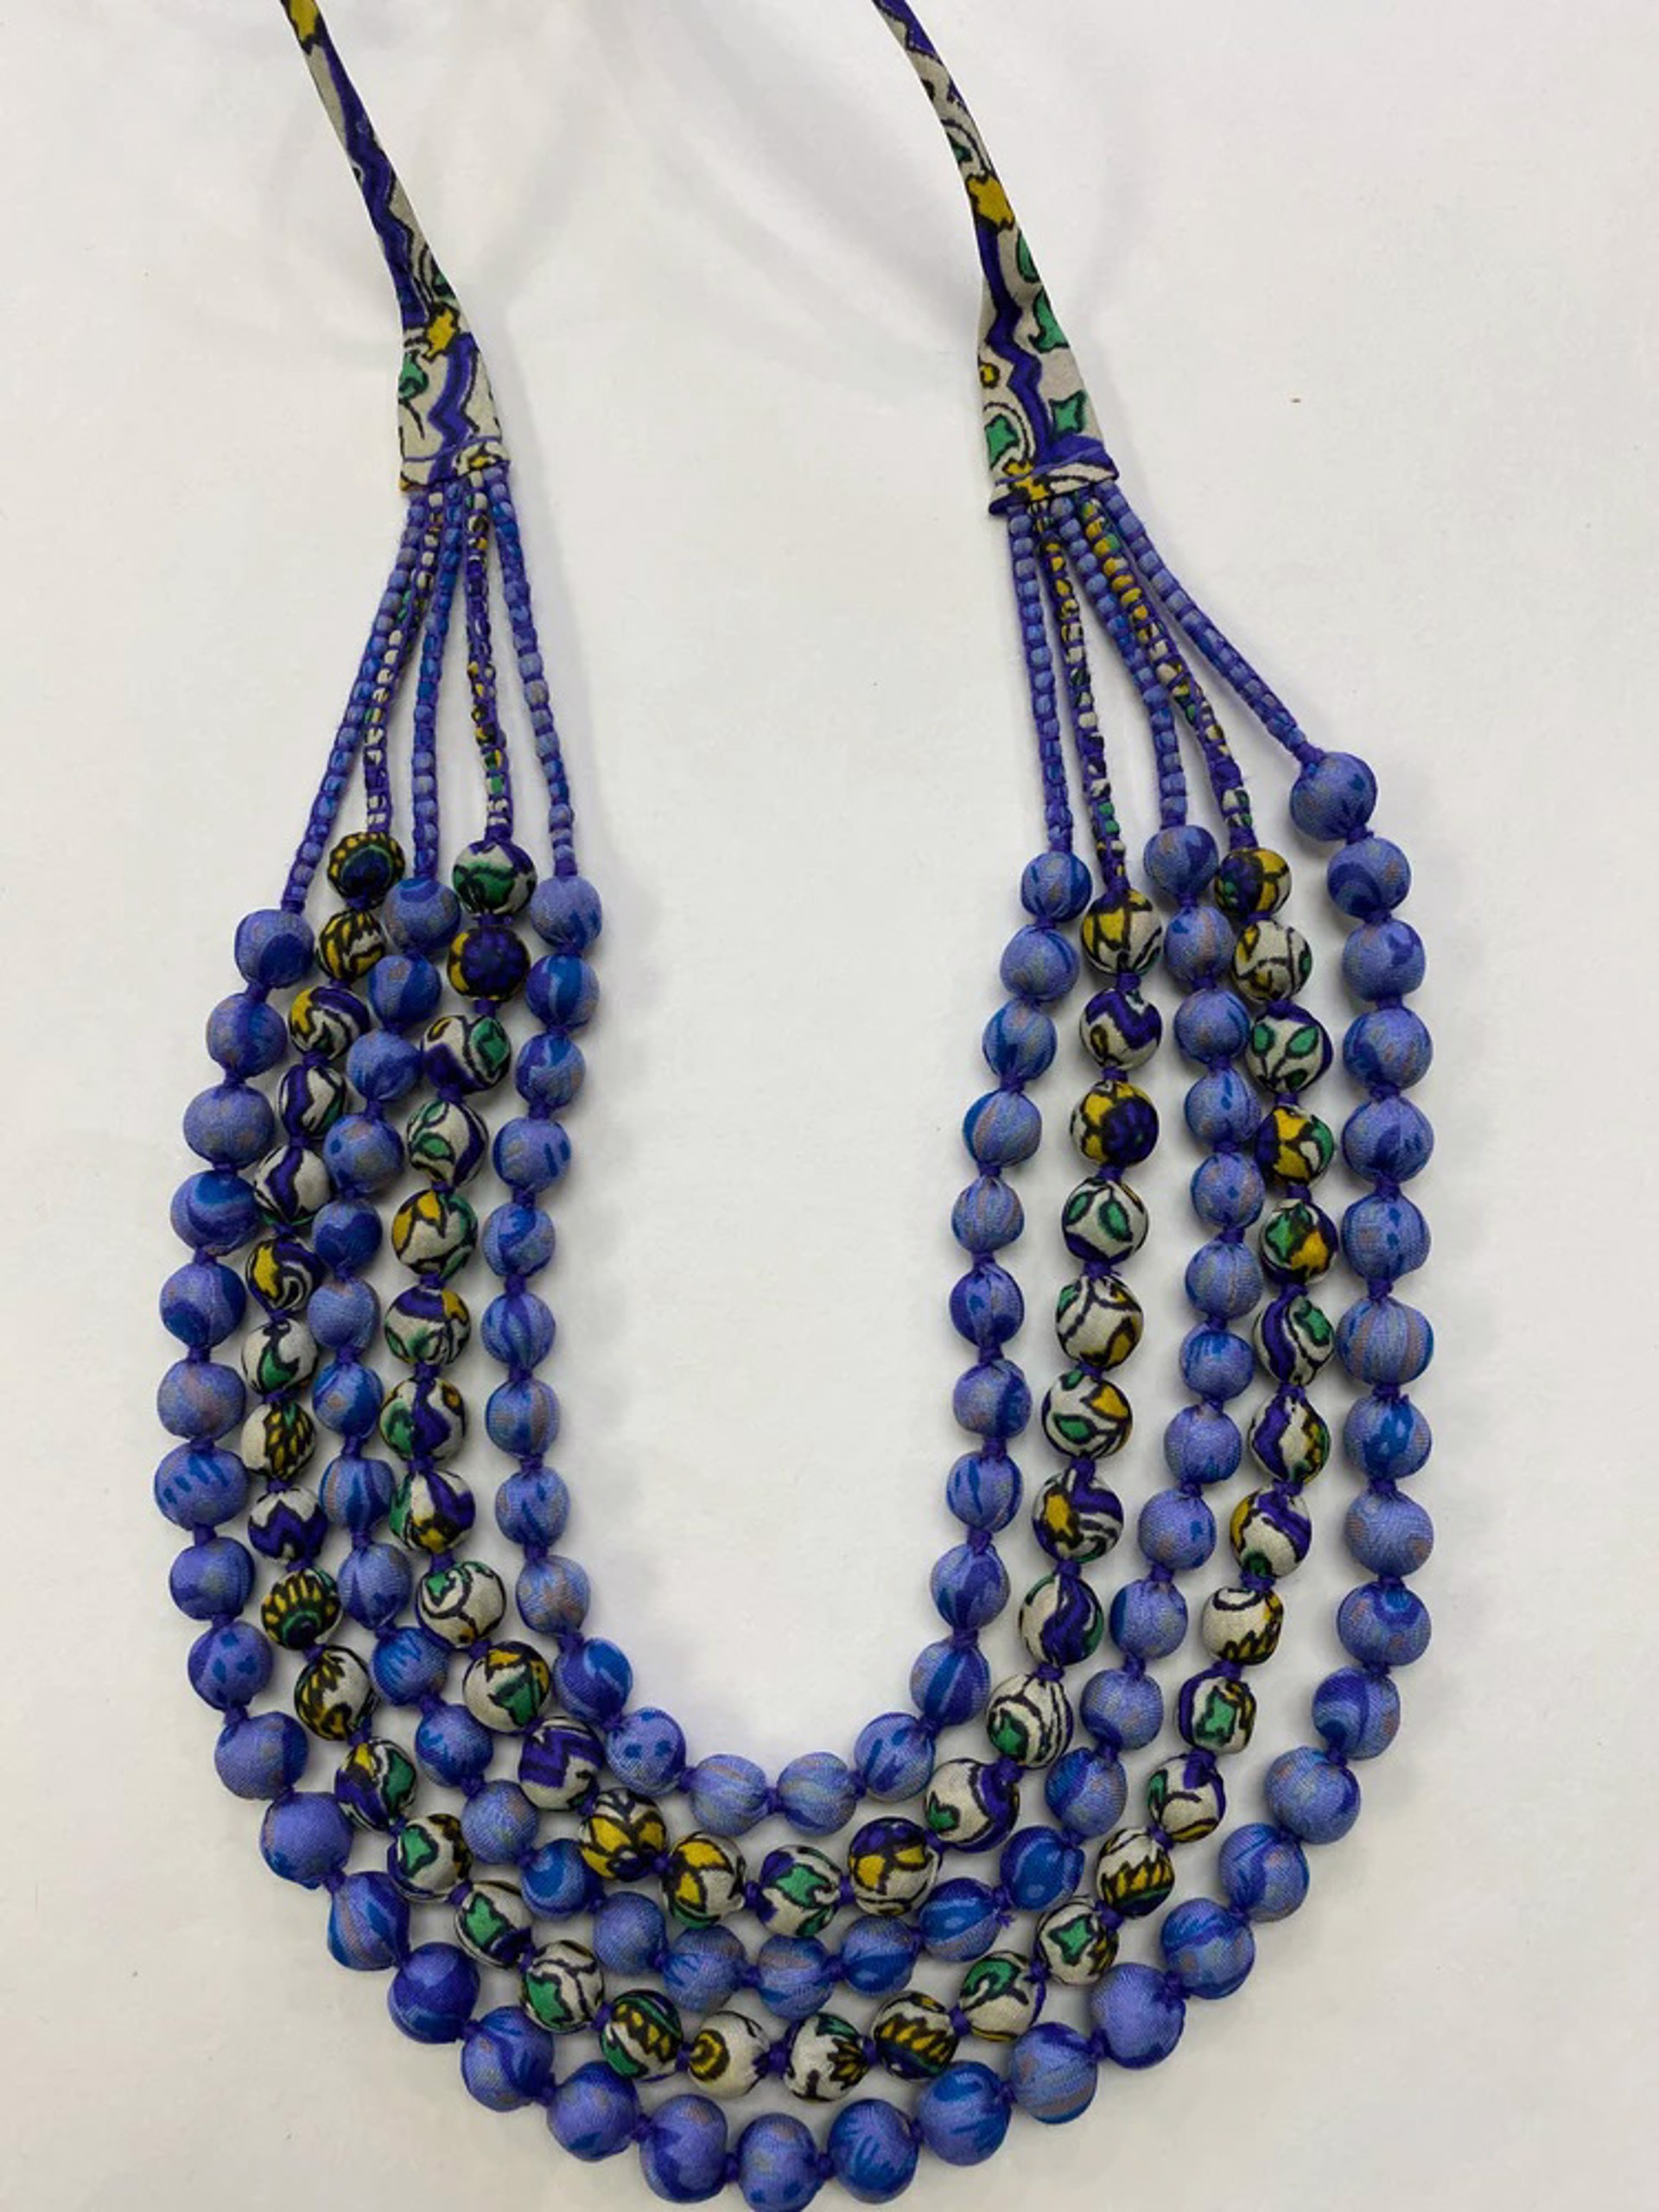 6-String Sari Bead Necklace by J. Catma